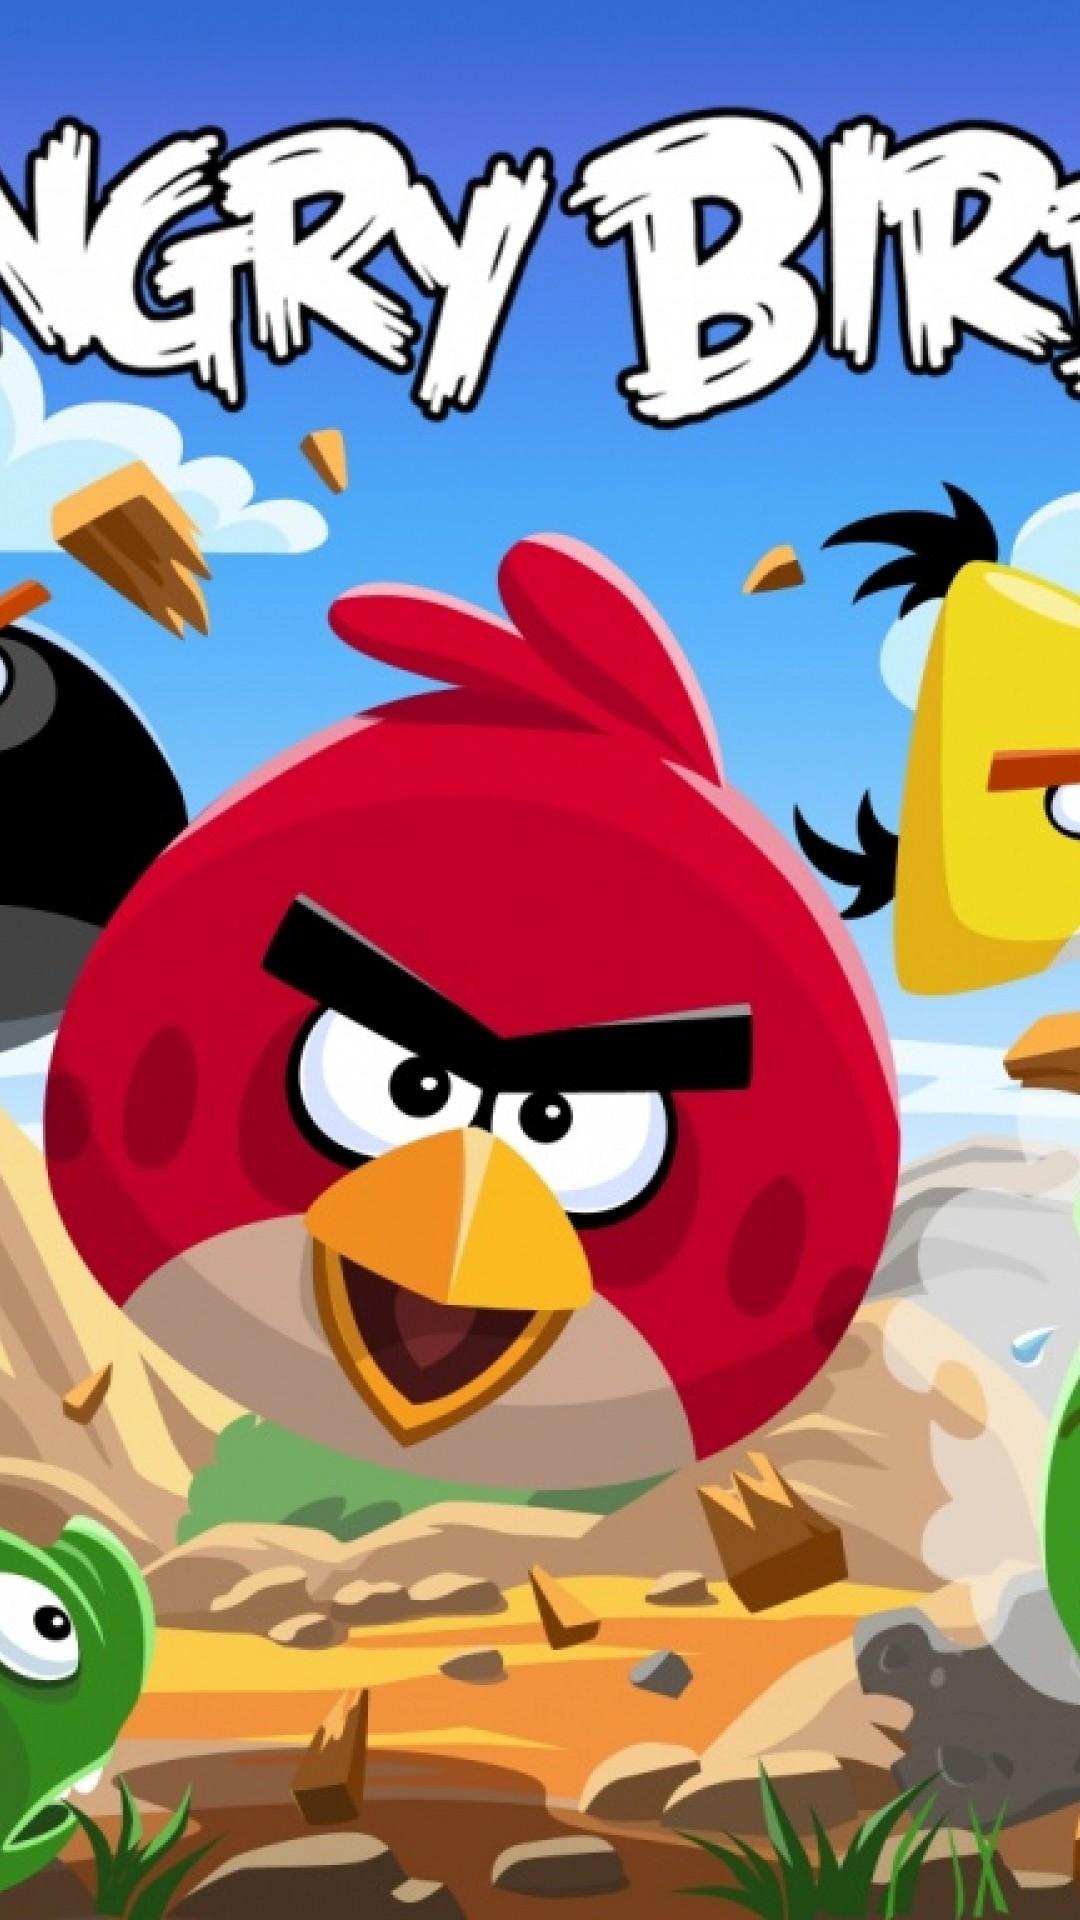 Free Download Angry Birds HD Wallpaper for Desktop